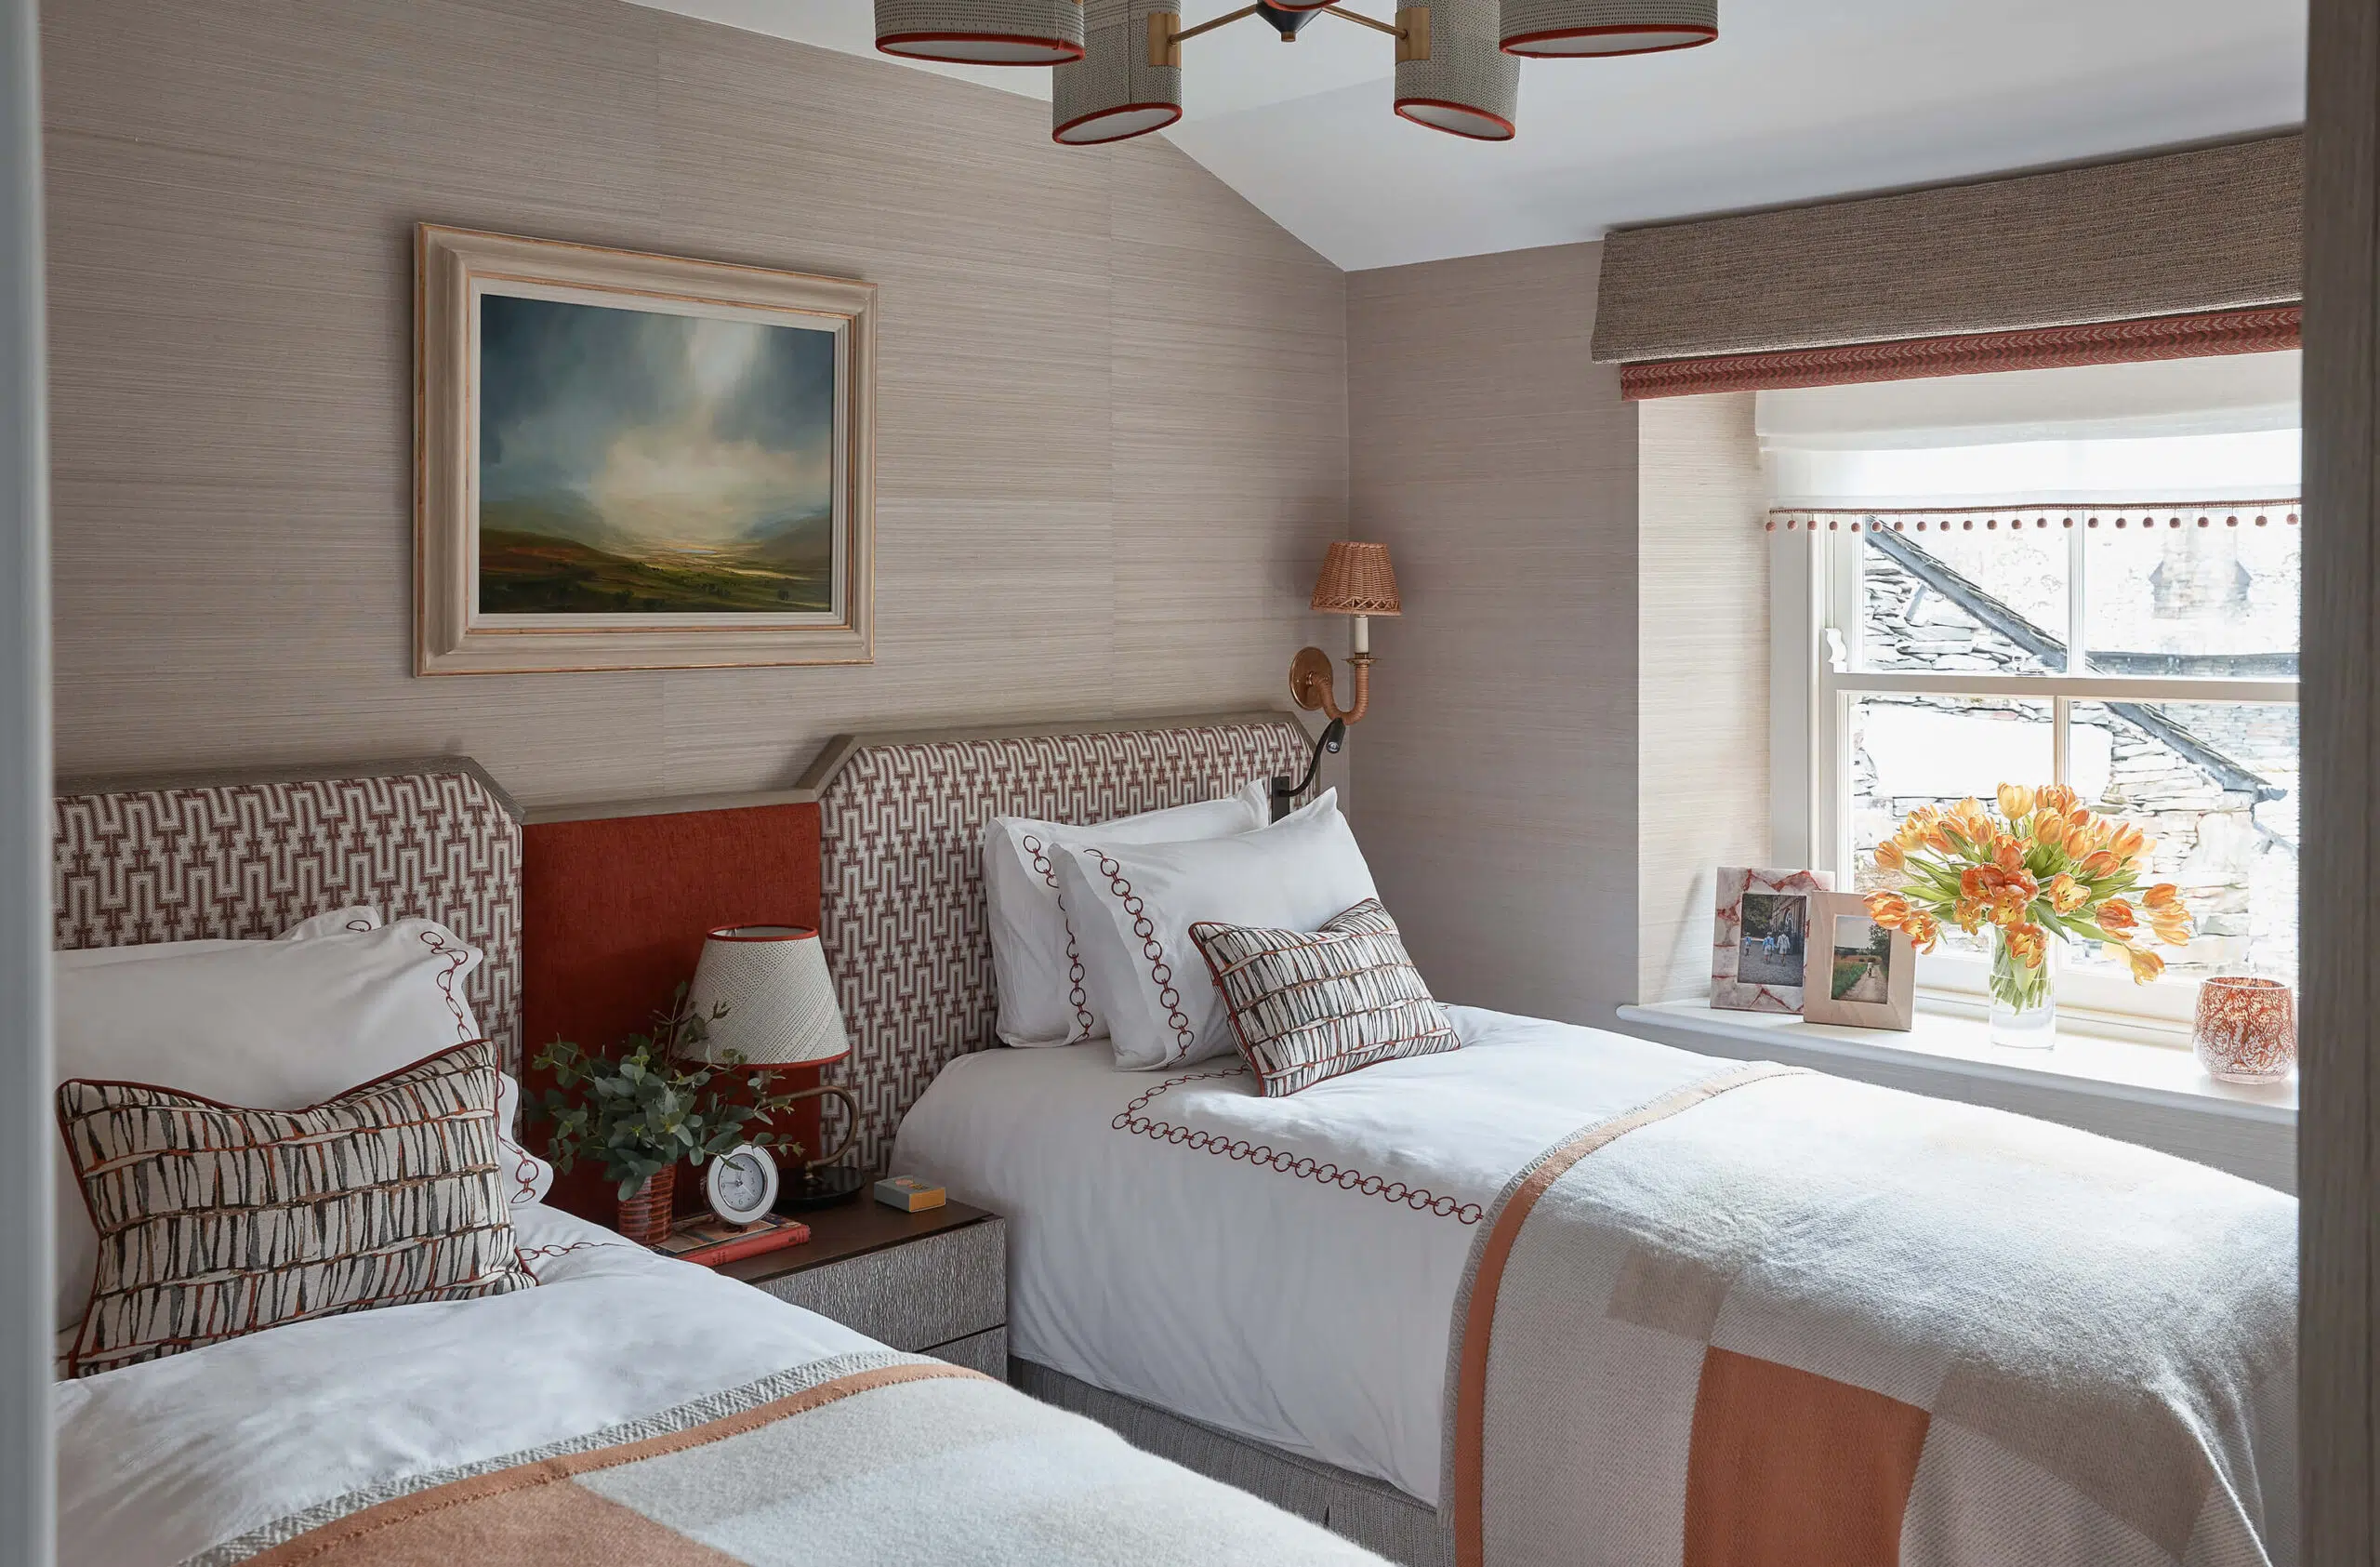 Bedroom of interior design project in Lake District